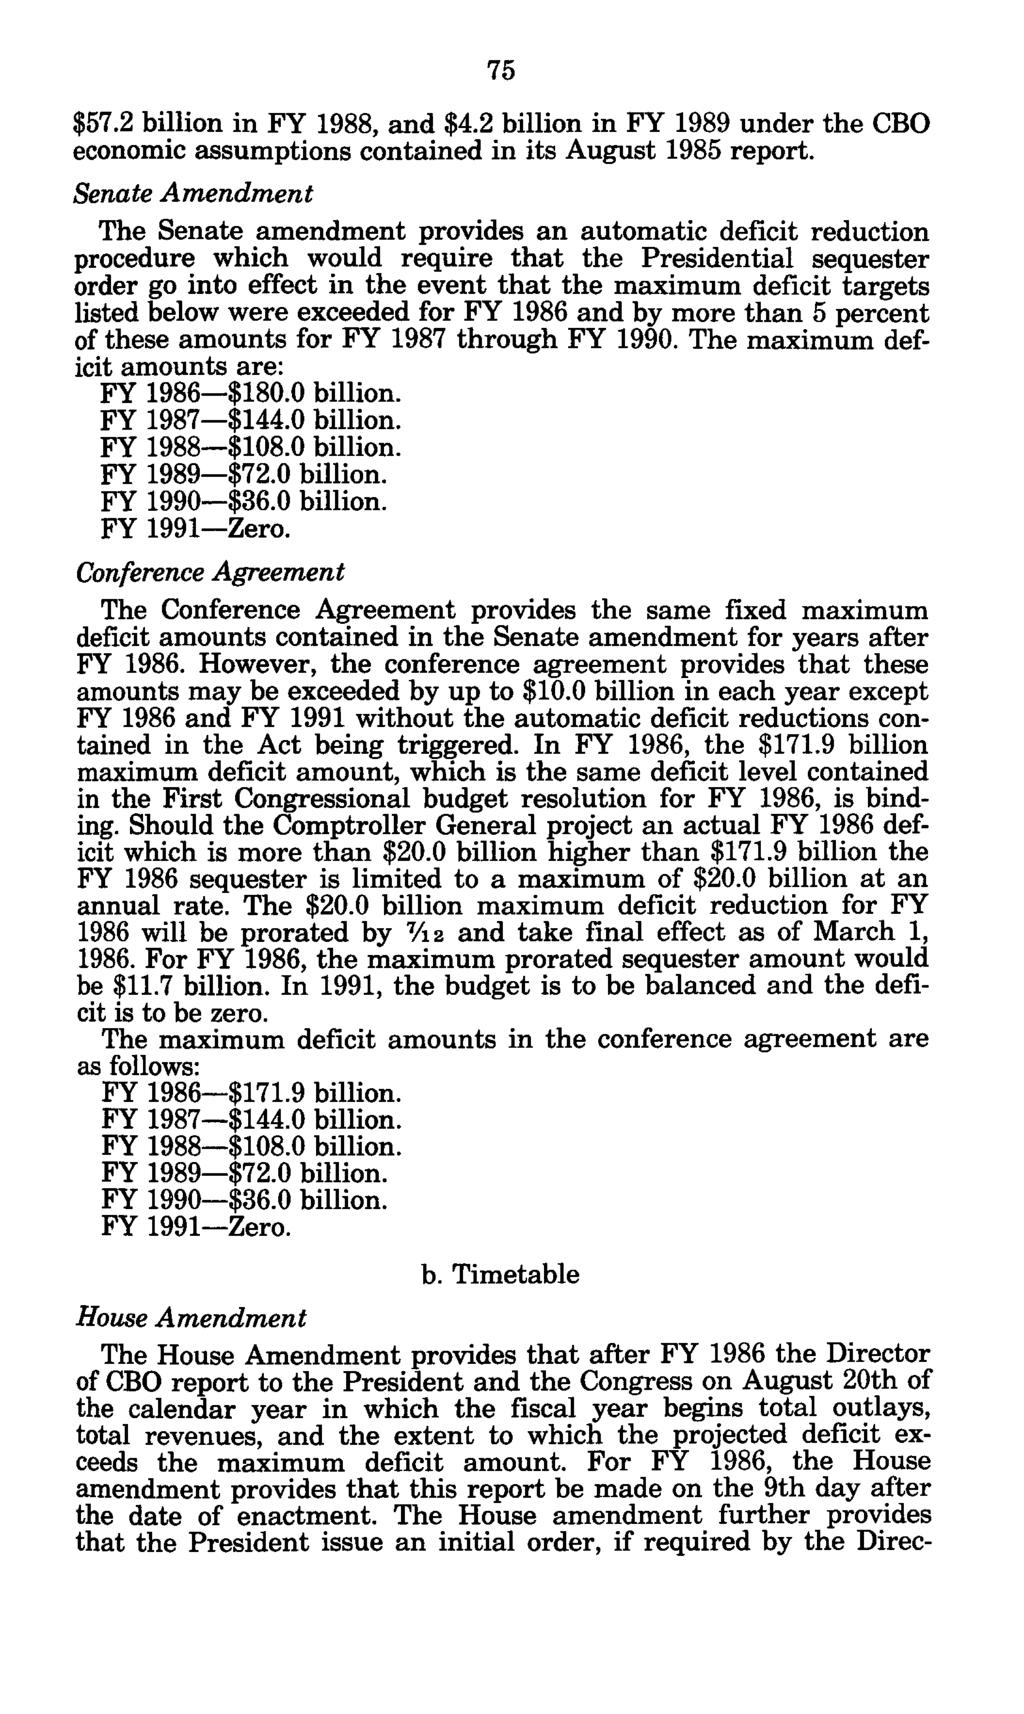 $57.2 billion in FY 1988, and $4.2 billion in FY 1989 under the CBO economic assumptions contained in its August 1985 report.